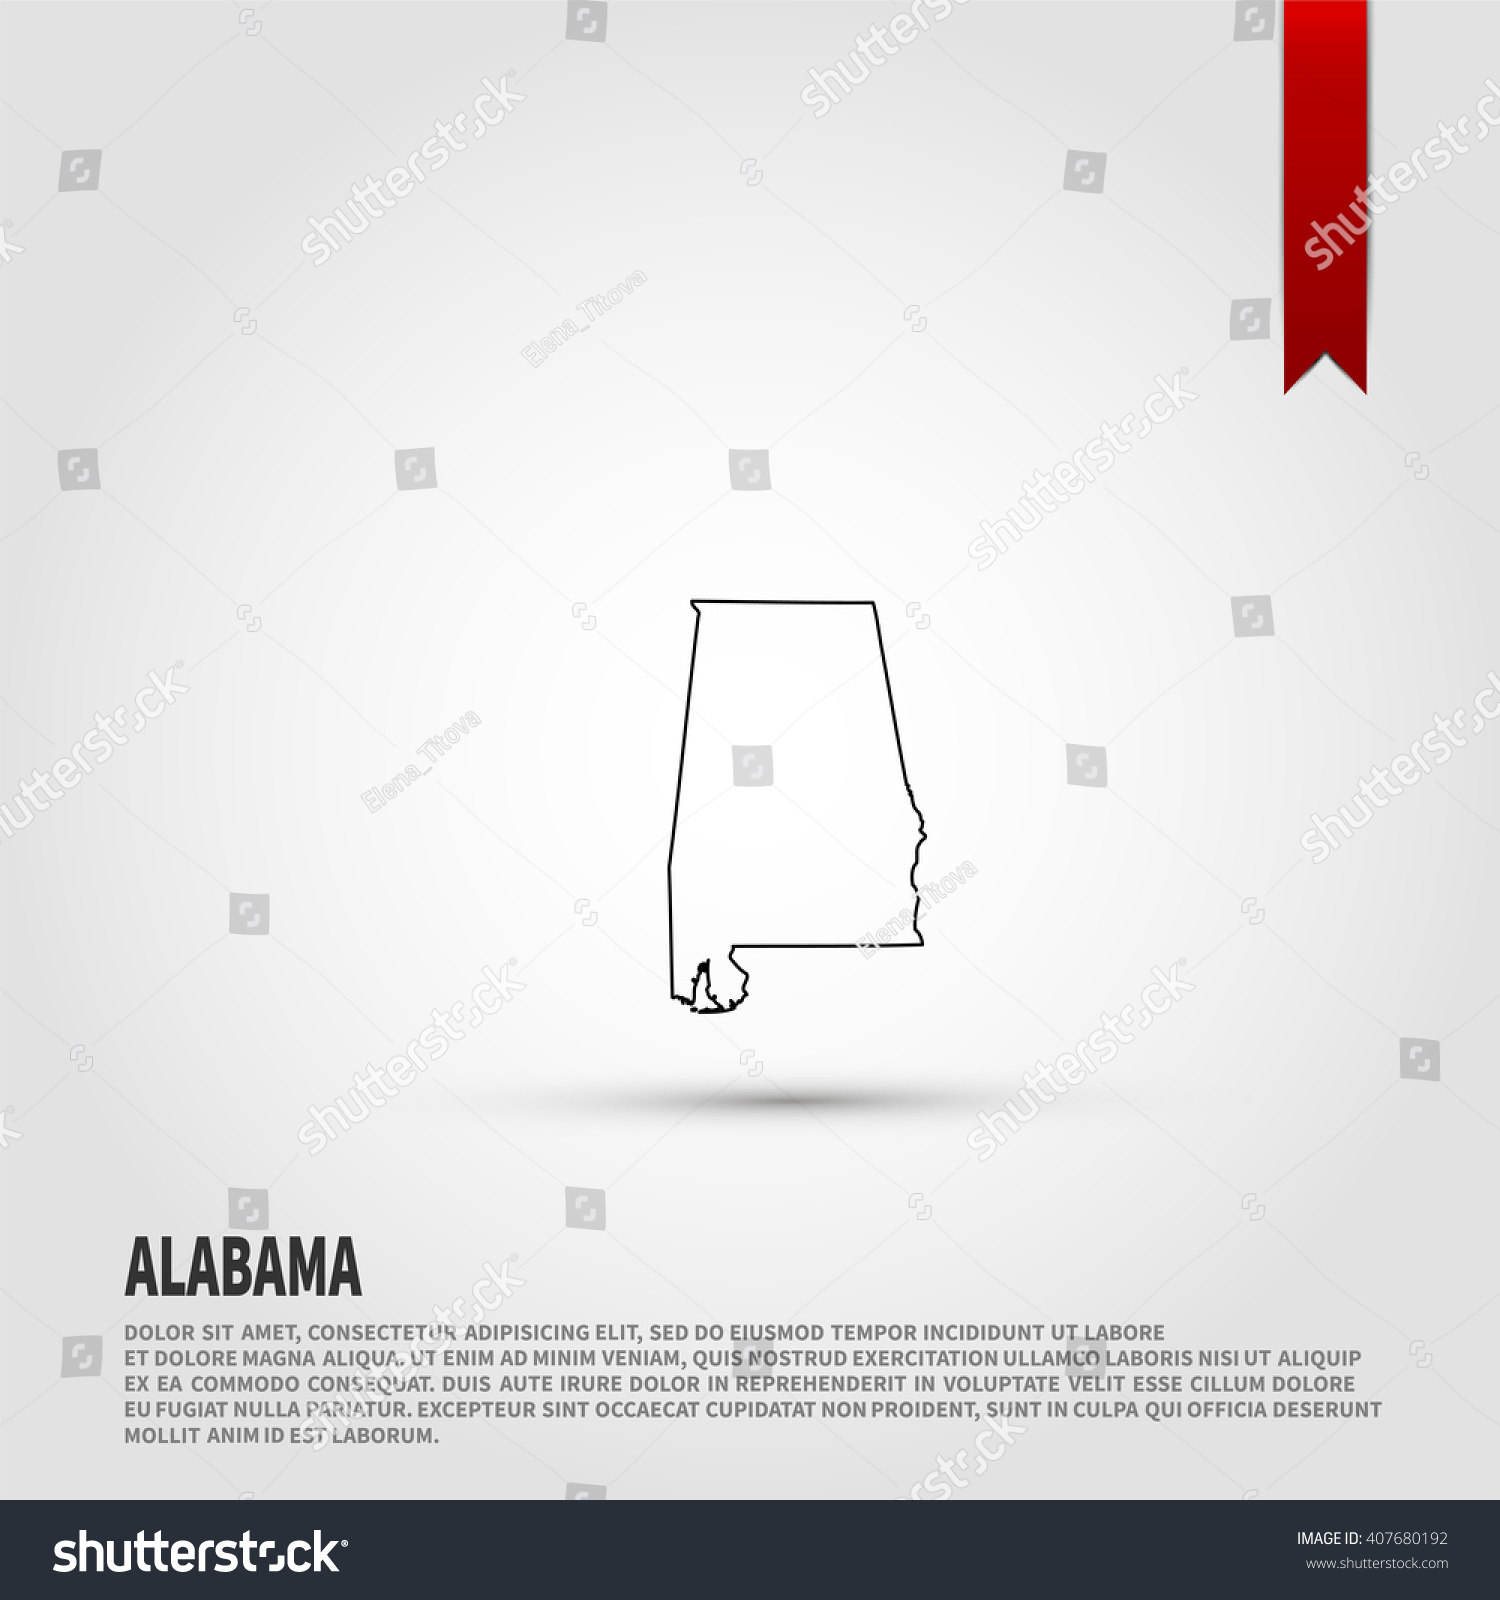 Map Of The Alabama State Vector Illustration Royalty Free Stock